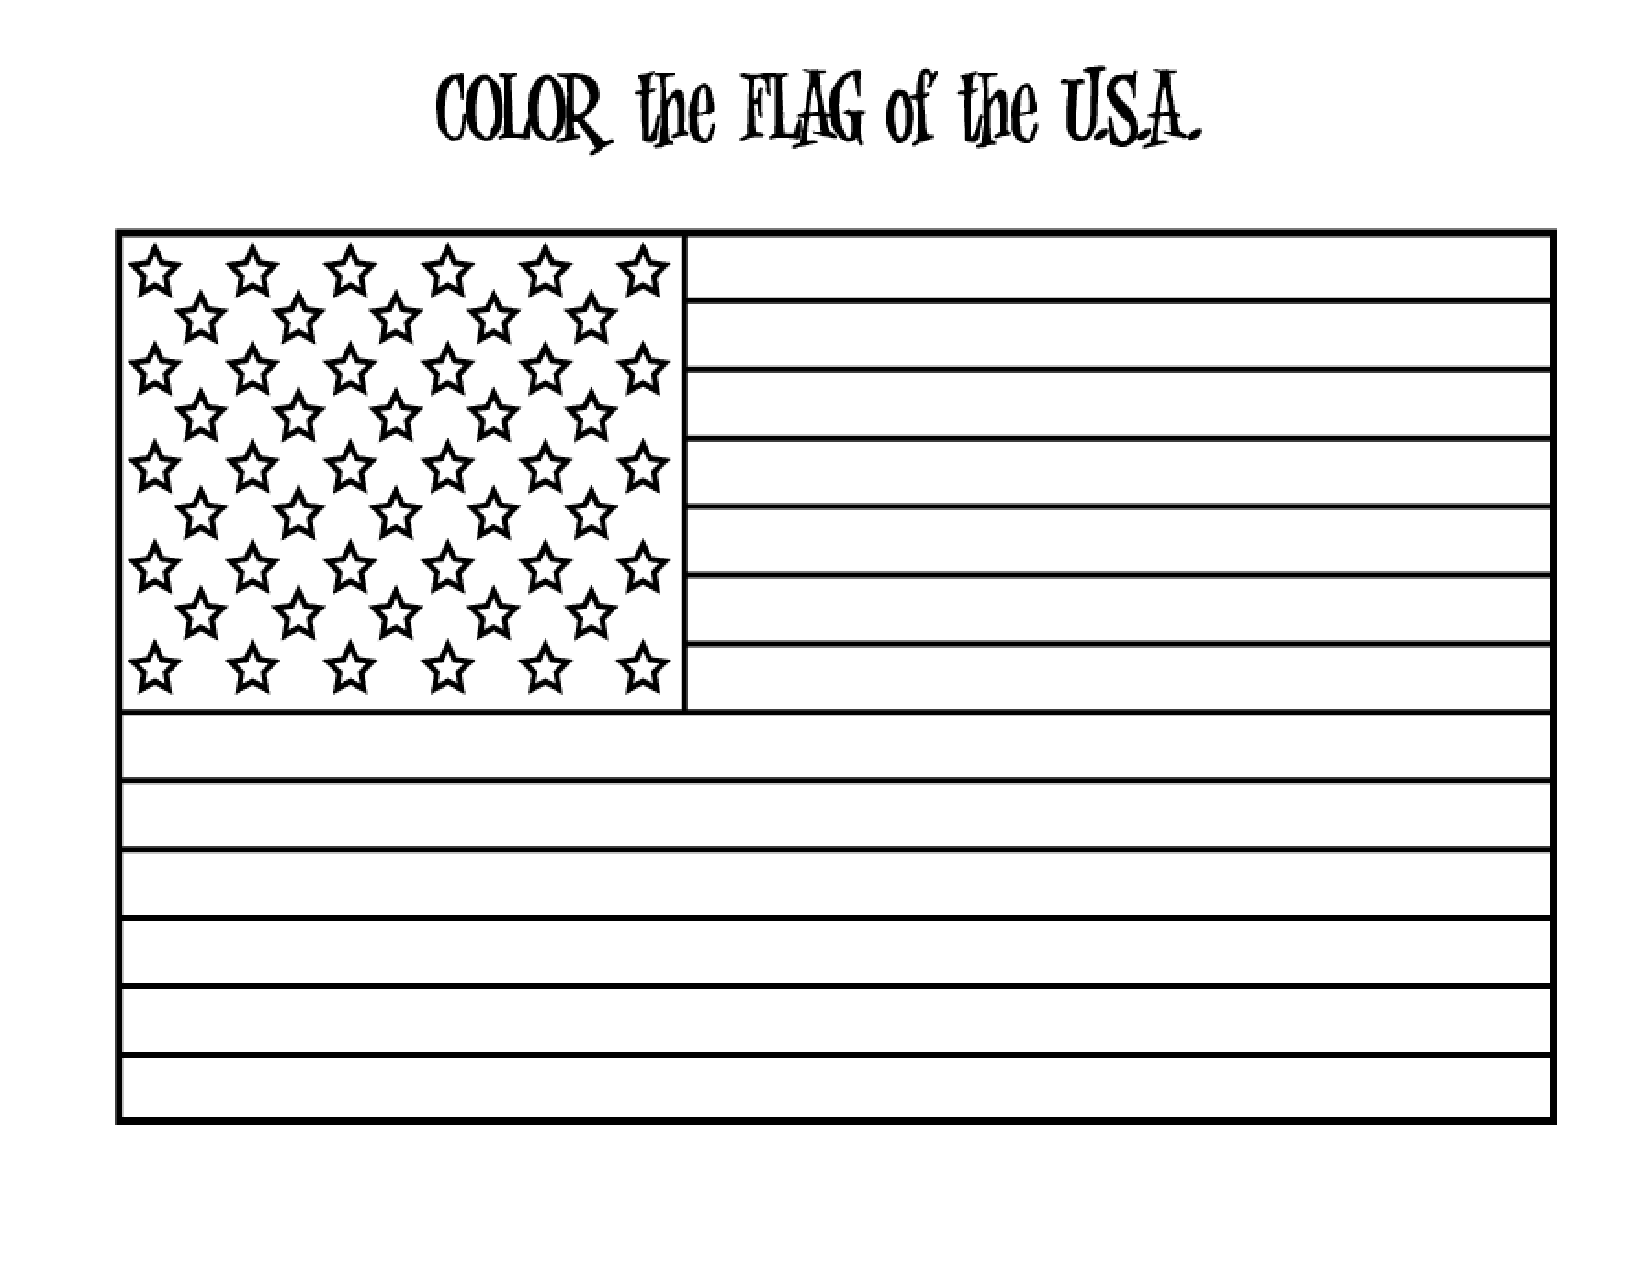 American Flag Coloring Page Image